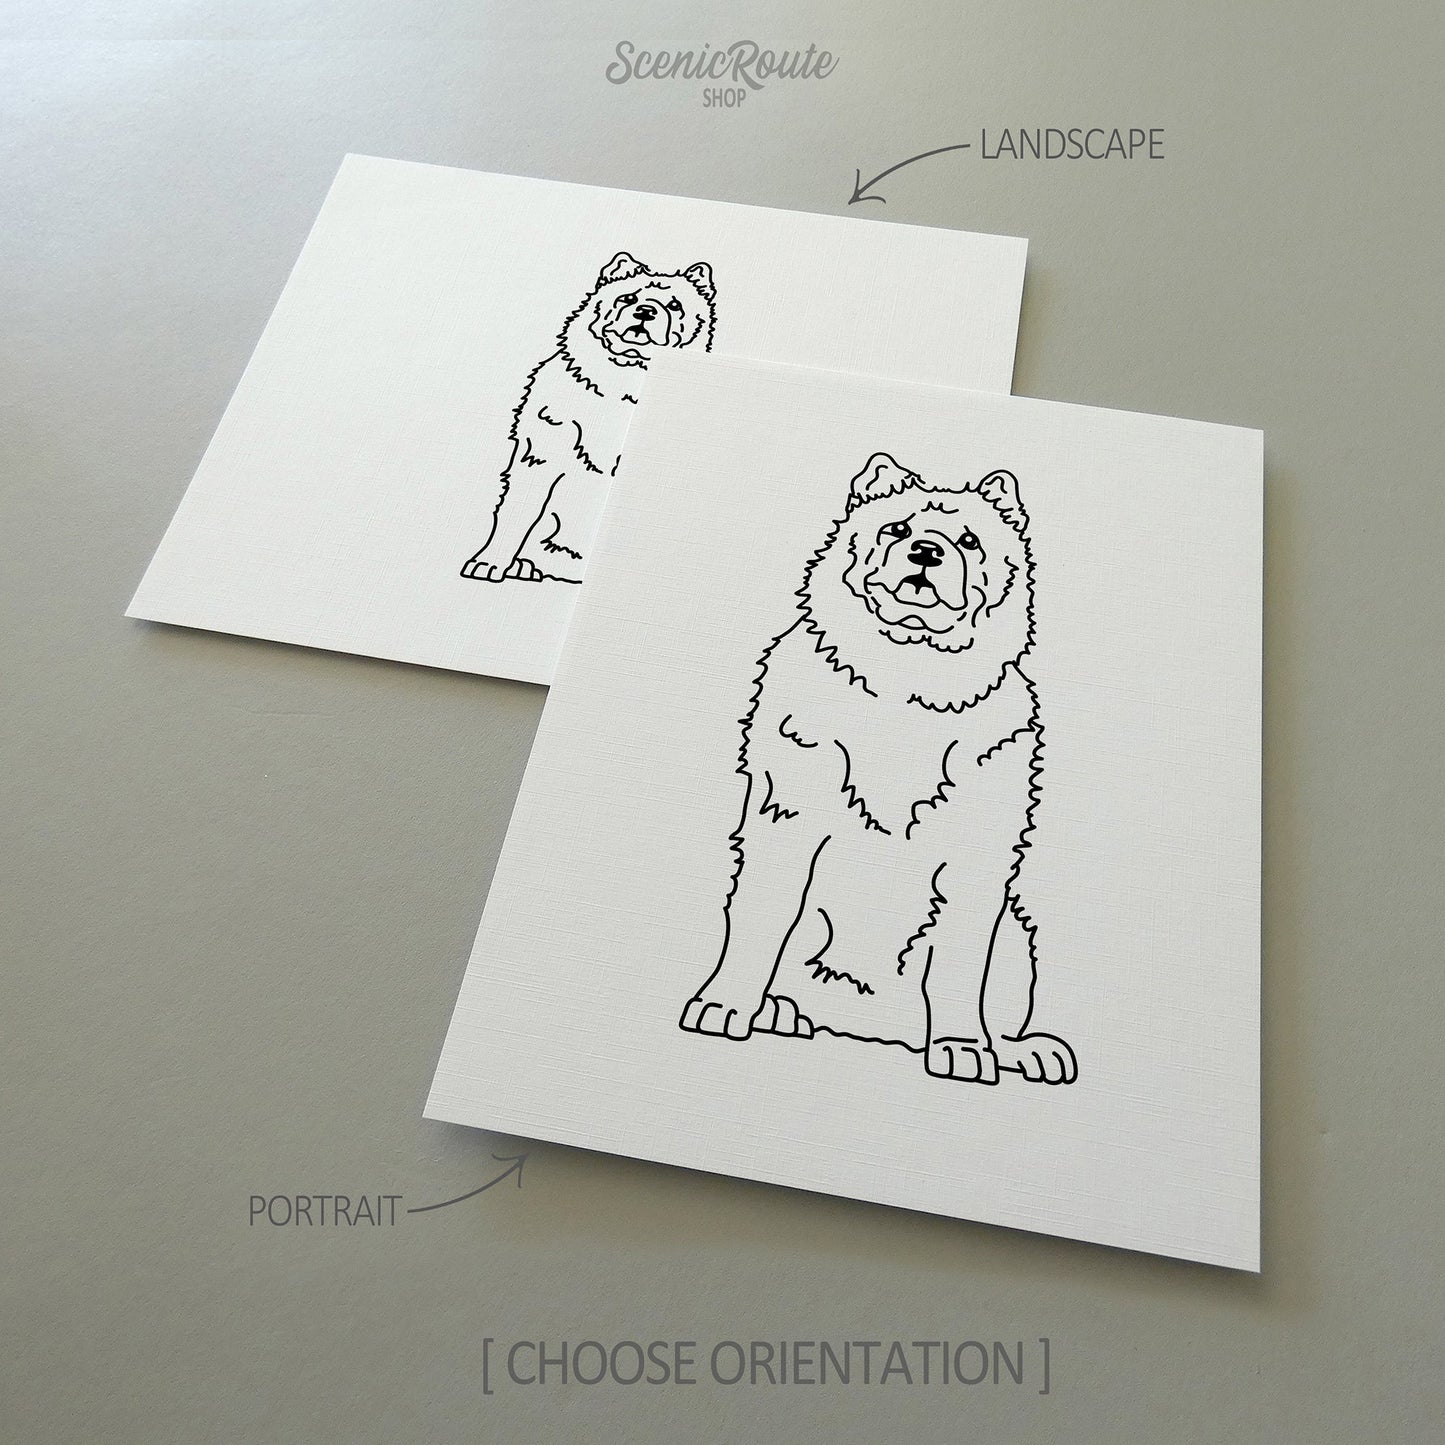 Two drawings of a Chow dog on white linen paper with a gray background.  Pieces are shown in portrait and landscape orientation options to illustrate the available art print options.